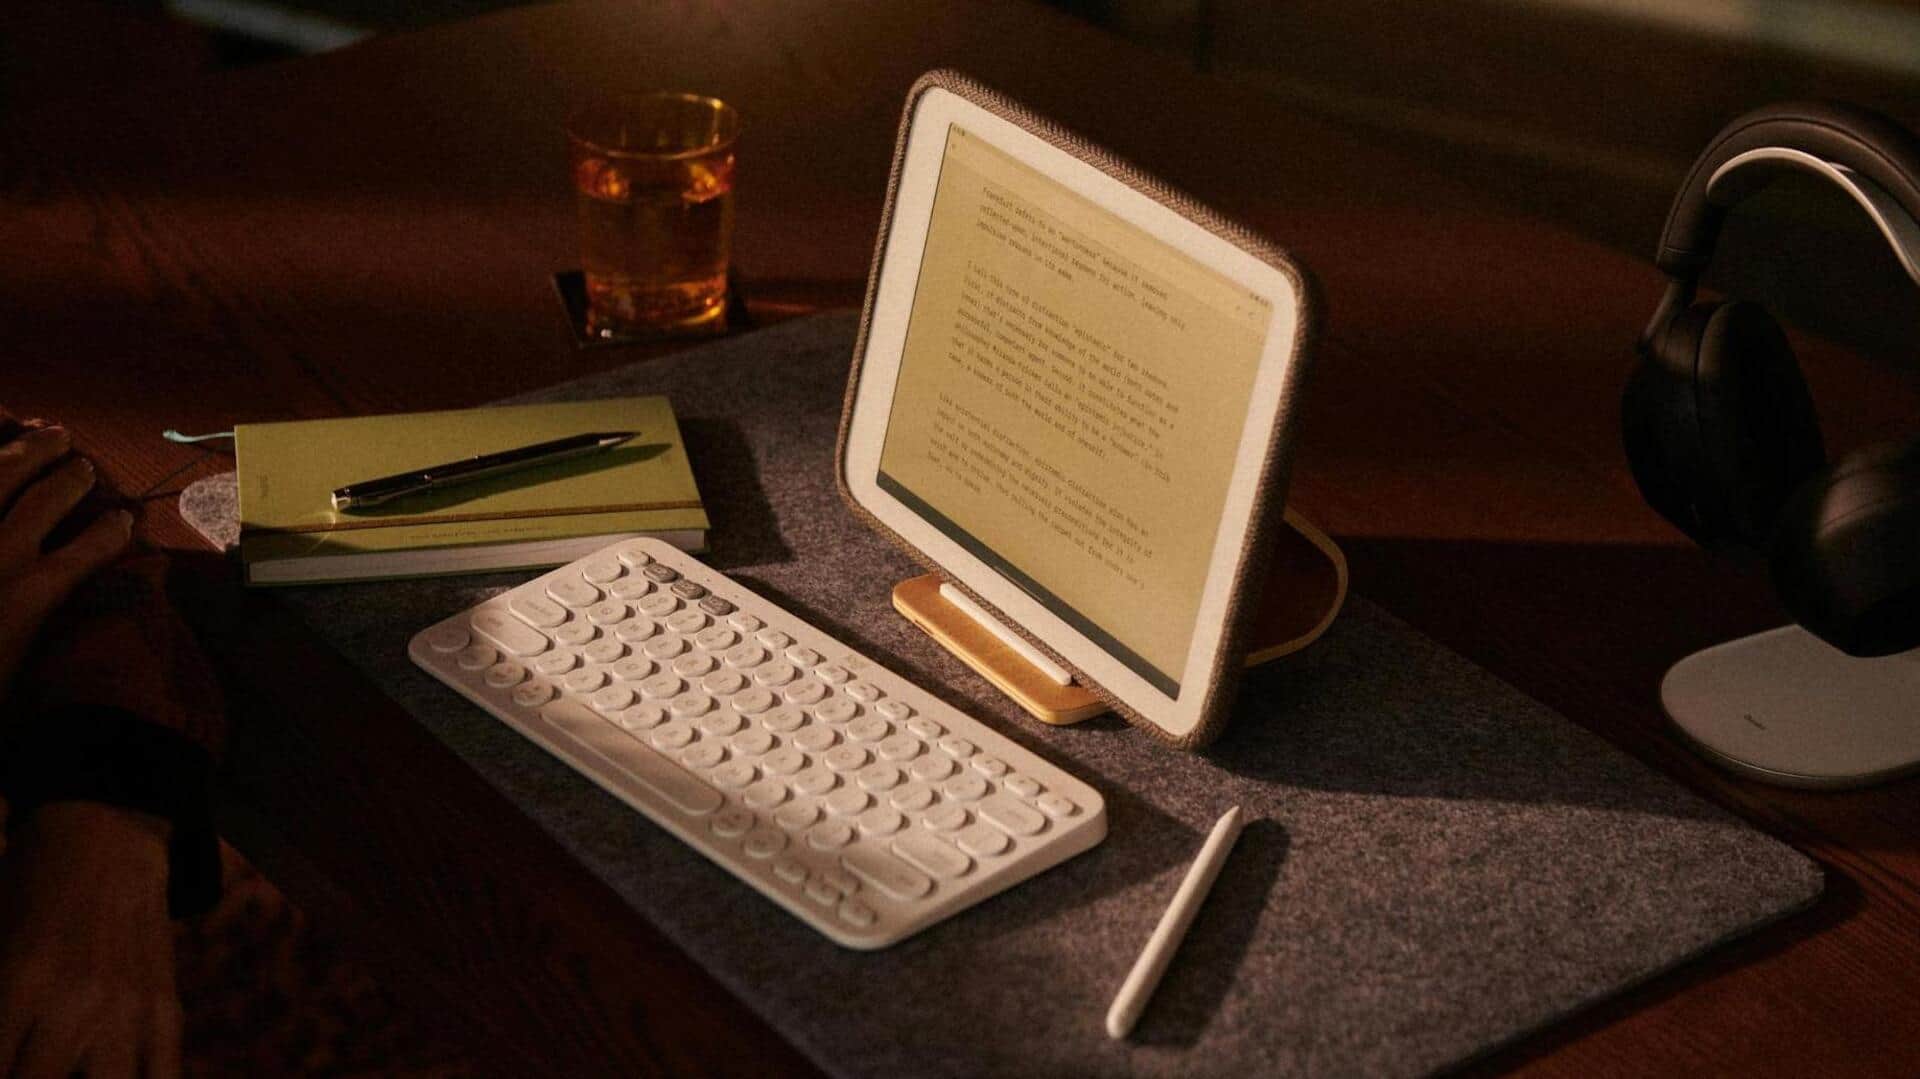 Daylight Computer unveils DC1 Kindle-like tablet for minimalist computing experience